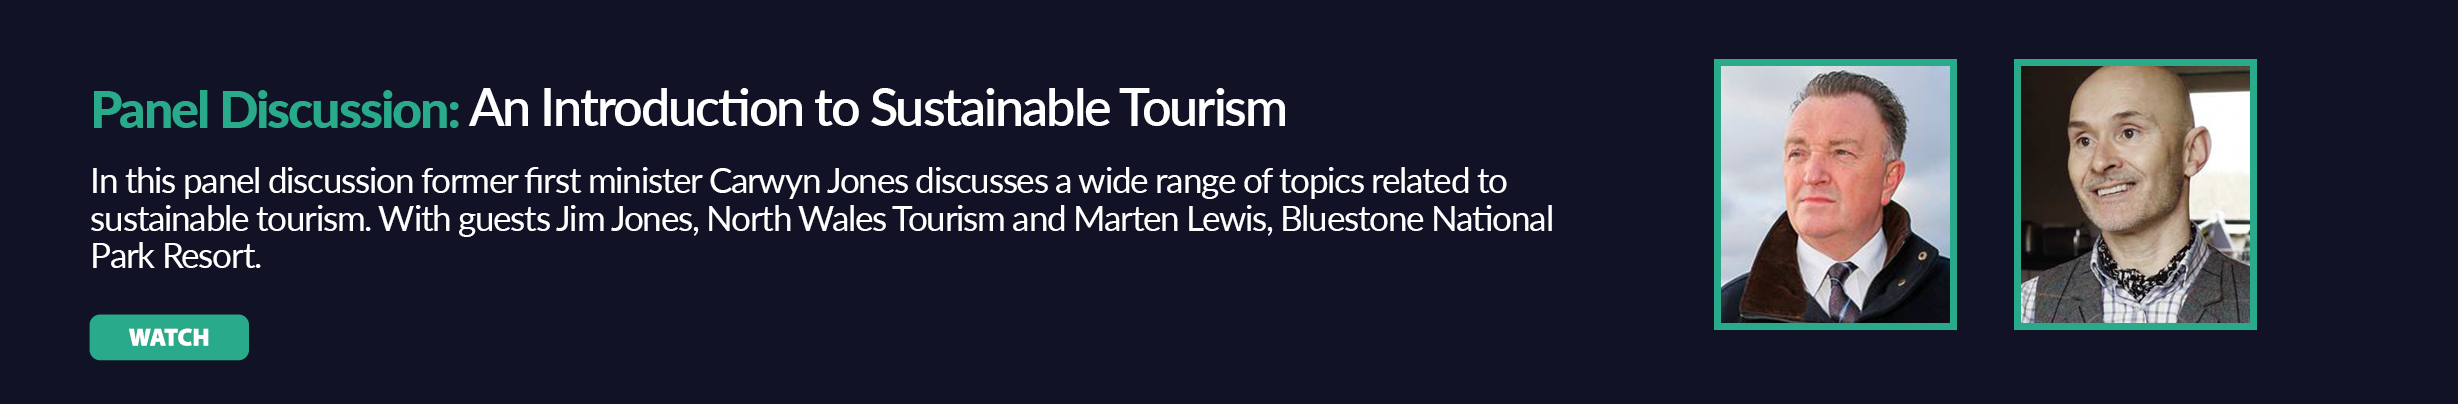 An Introduction to Sustainable Tourism